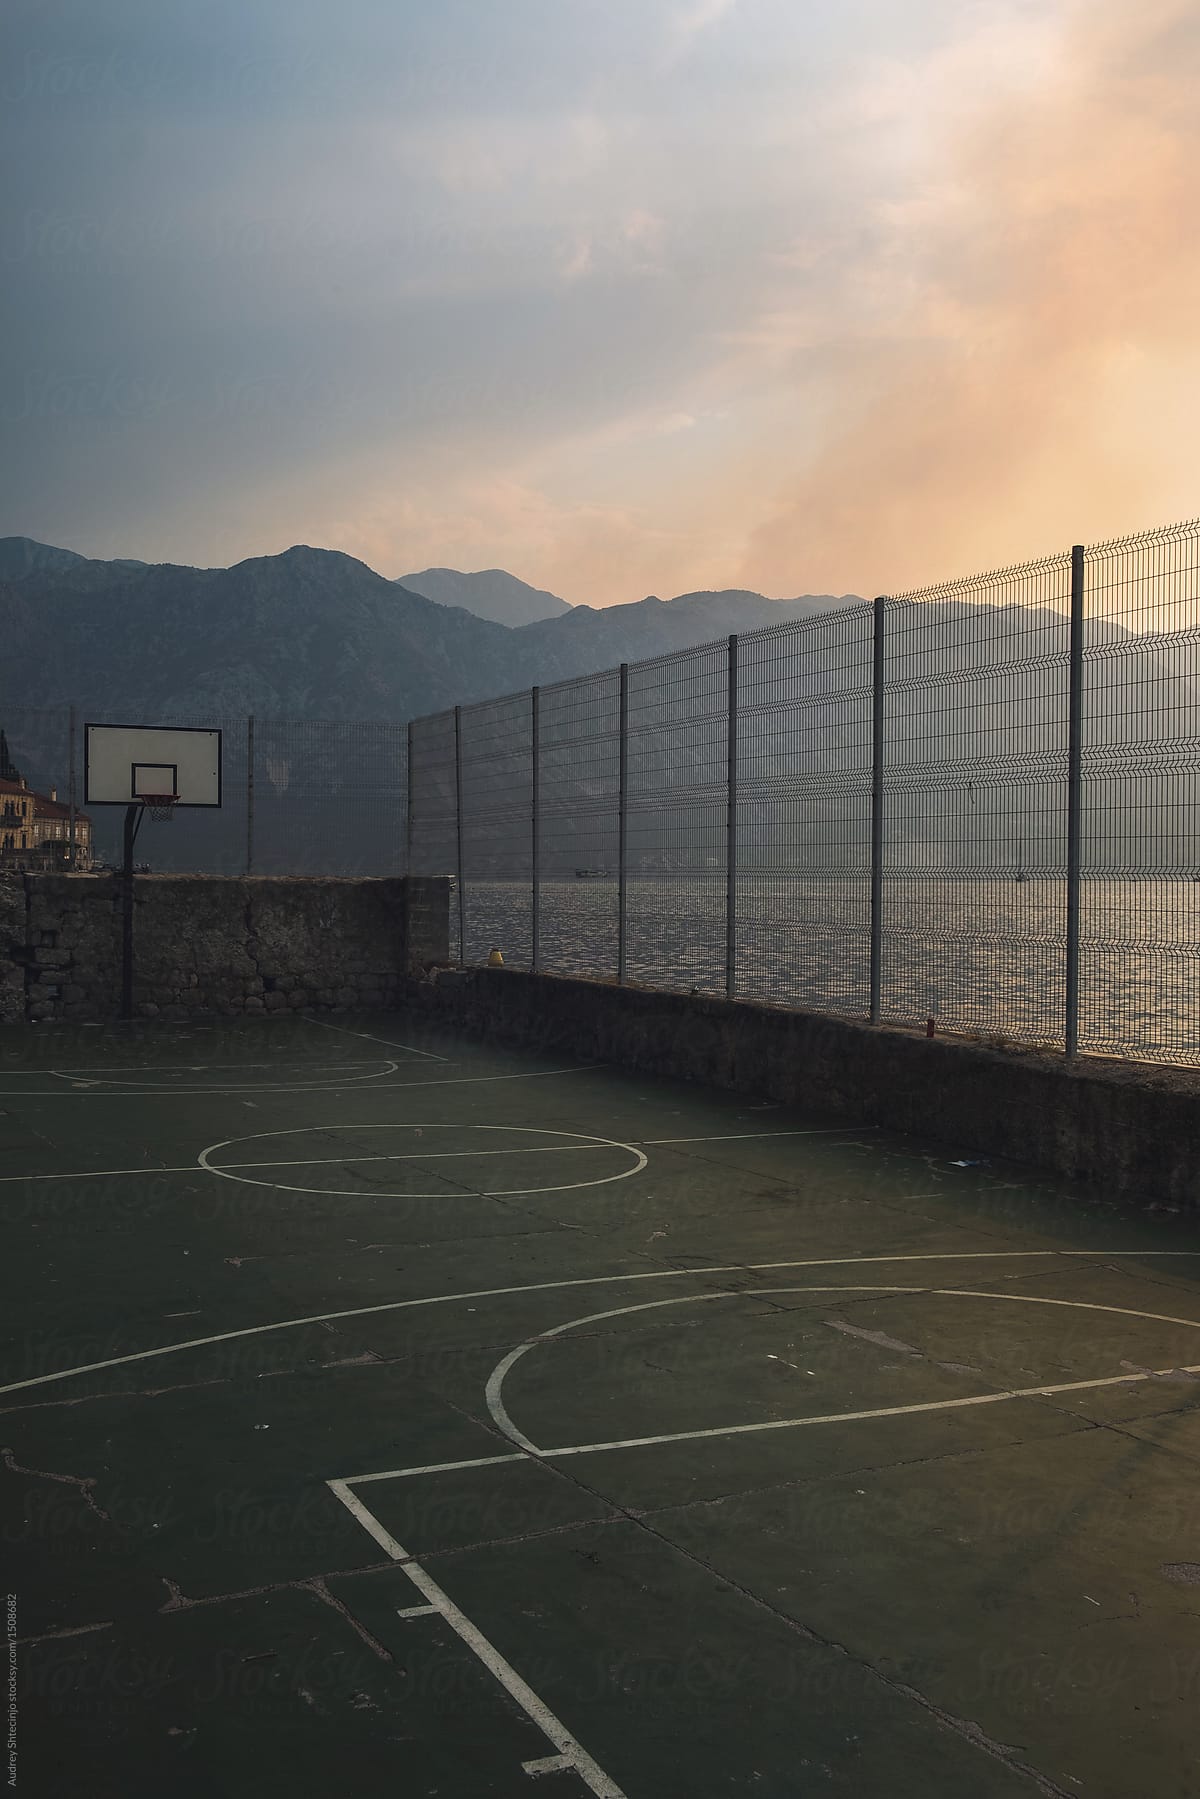 Half basketball courts with view of majestic mountain and overcast